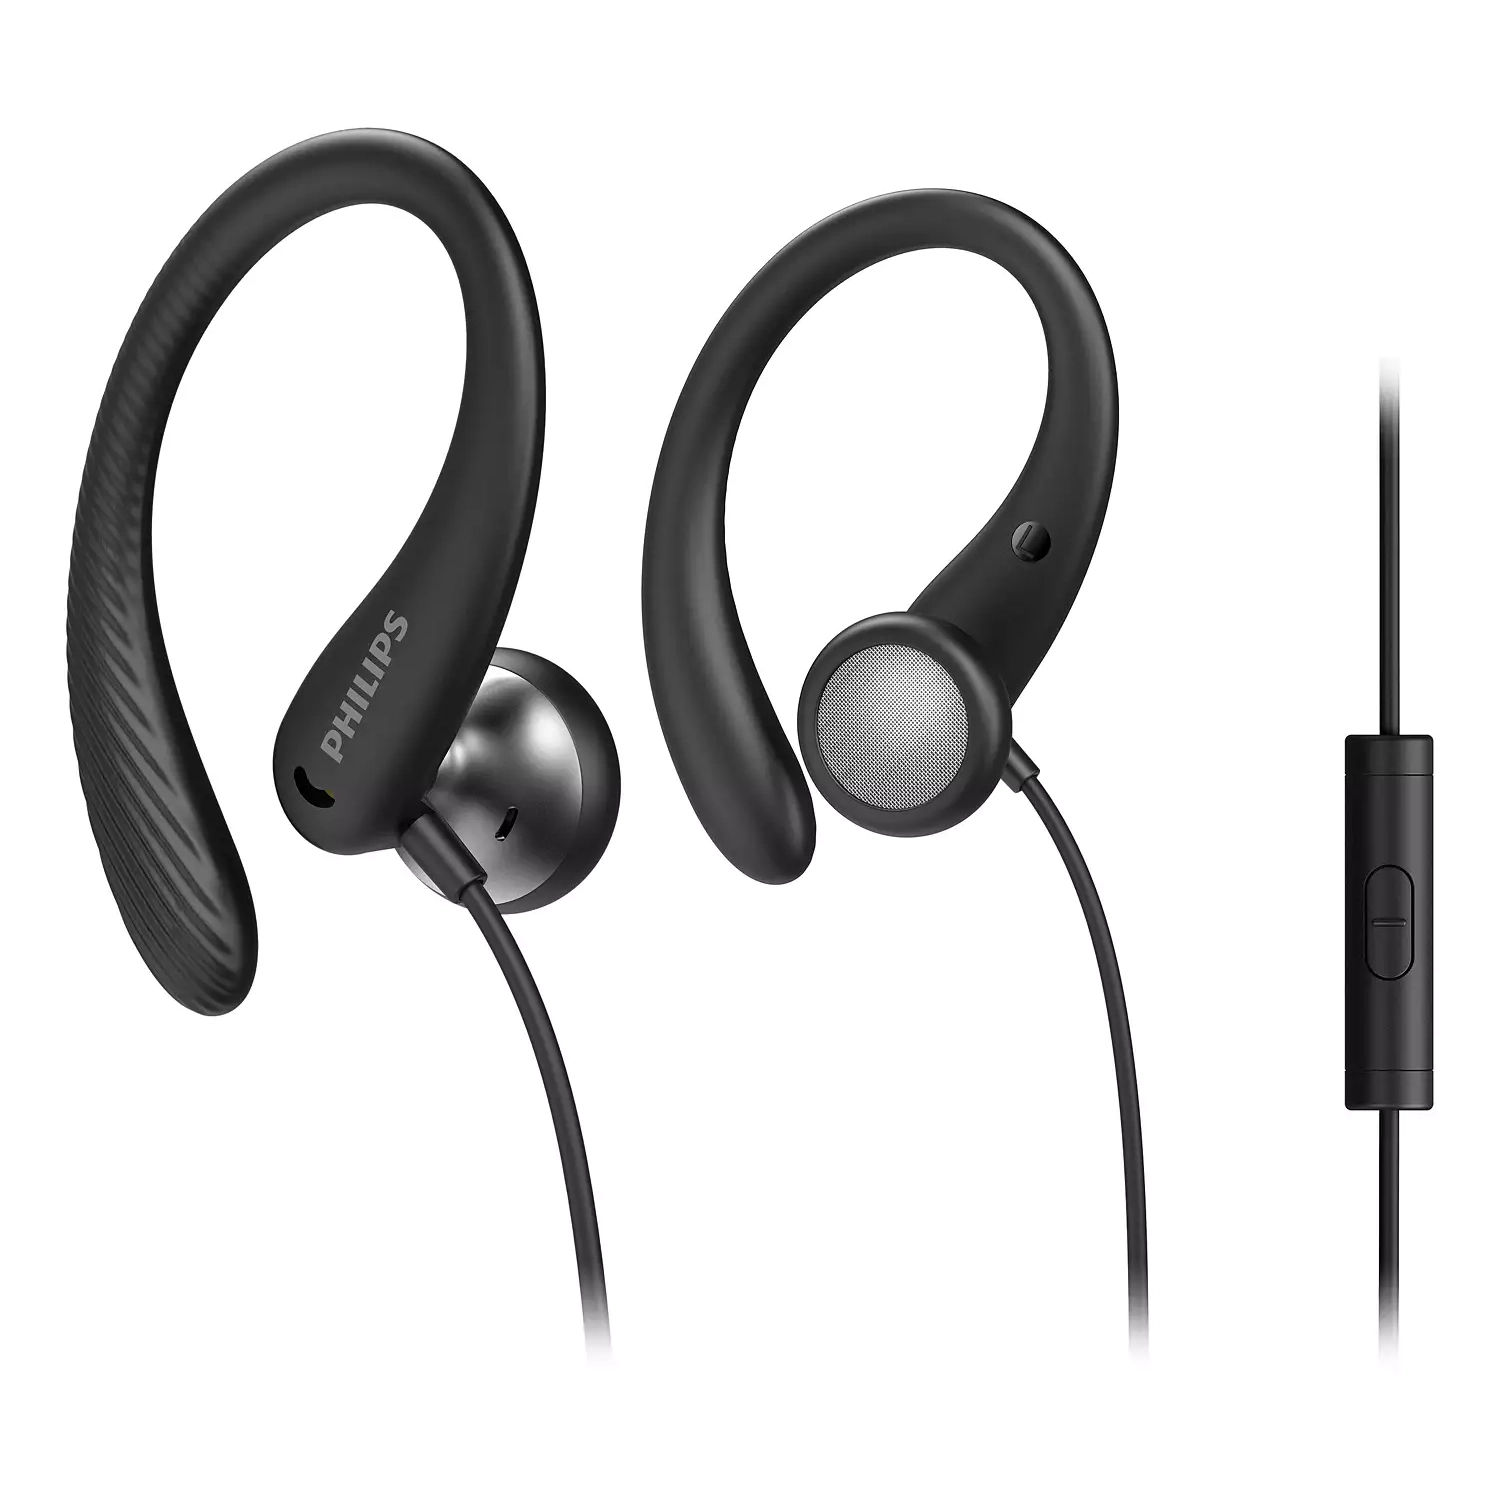 Philips Audio TAA1105BK/00 Sports Headphones With Microphone, In-Ear Headphones (Flexible Ear Hook, Bass Beat Vent, IPX2 Sweat Resistant, Secure Fit, In-Line Remote Control) Black